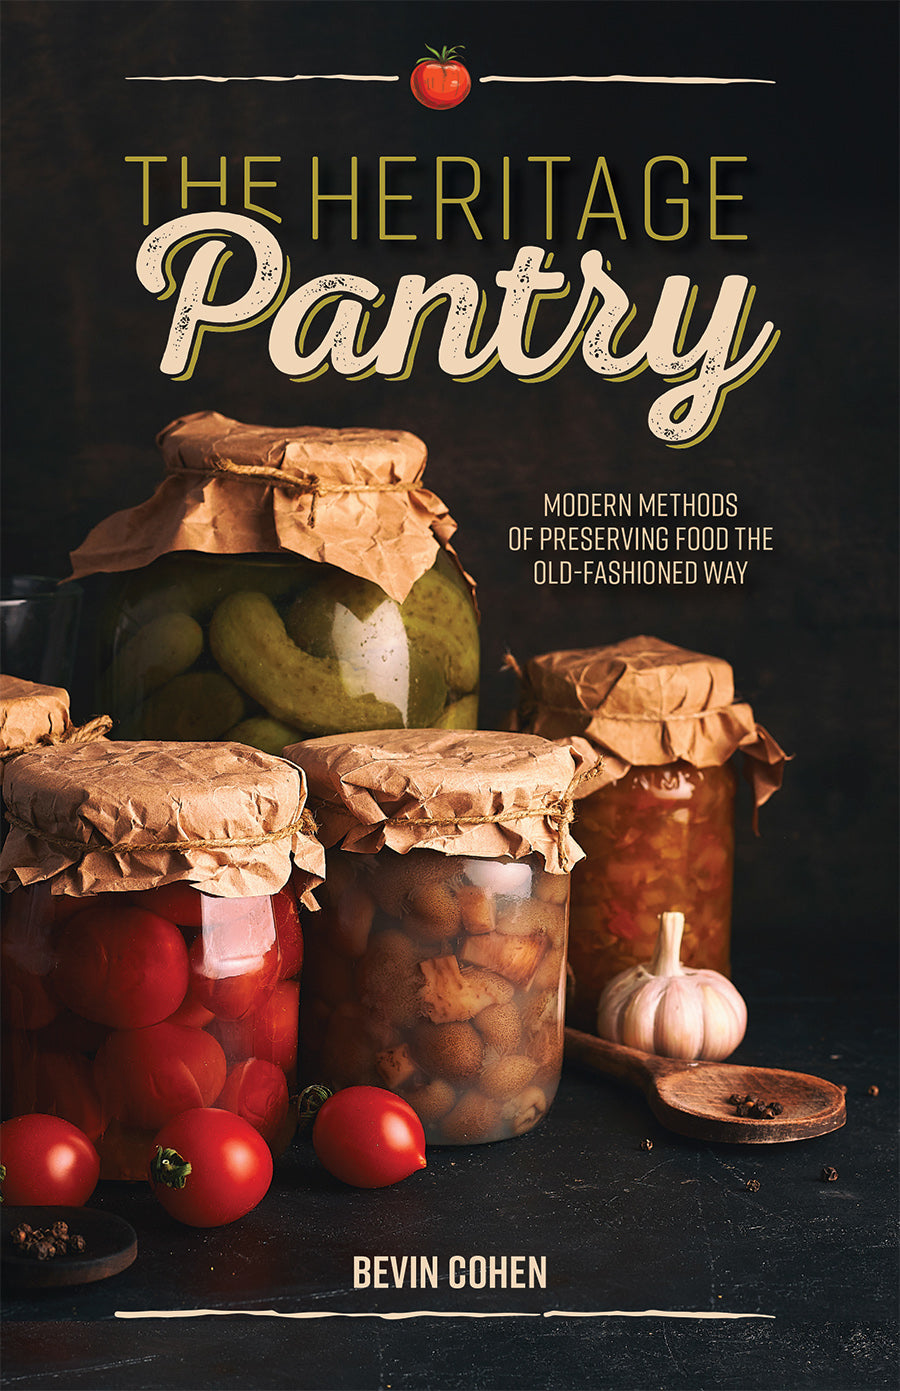 THE HERITAGE PANTRY